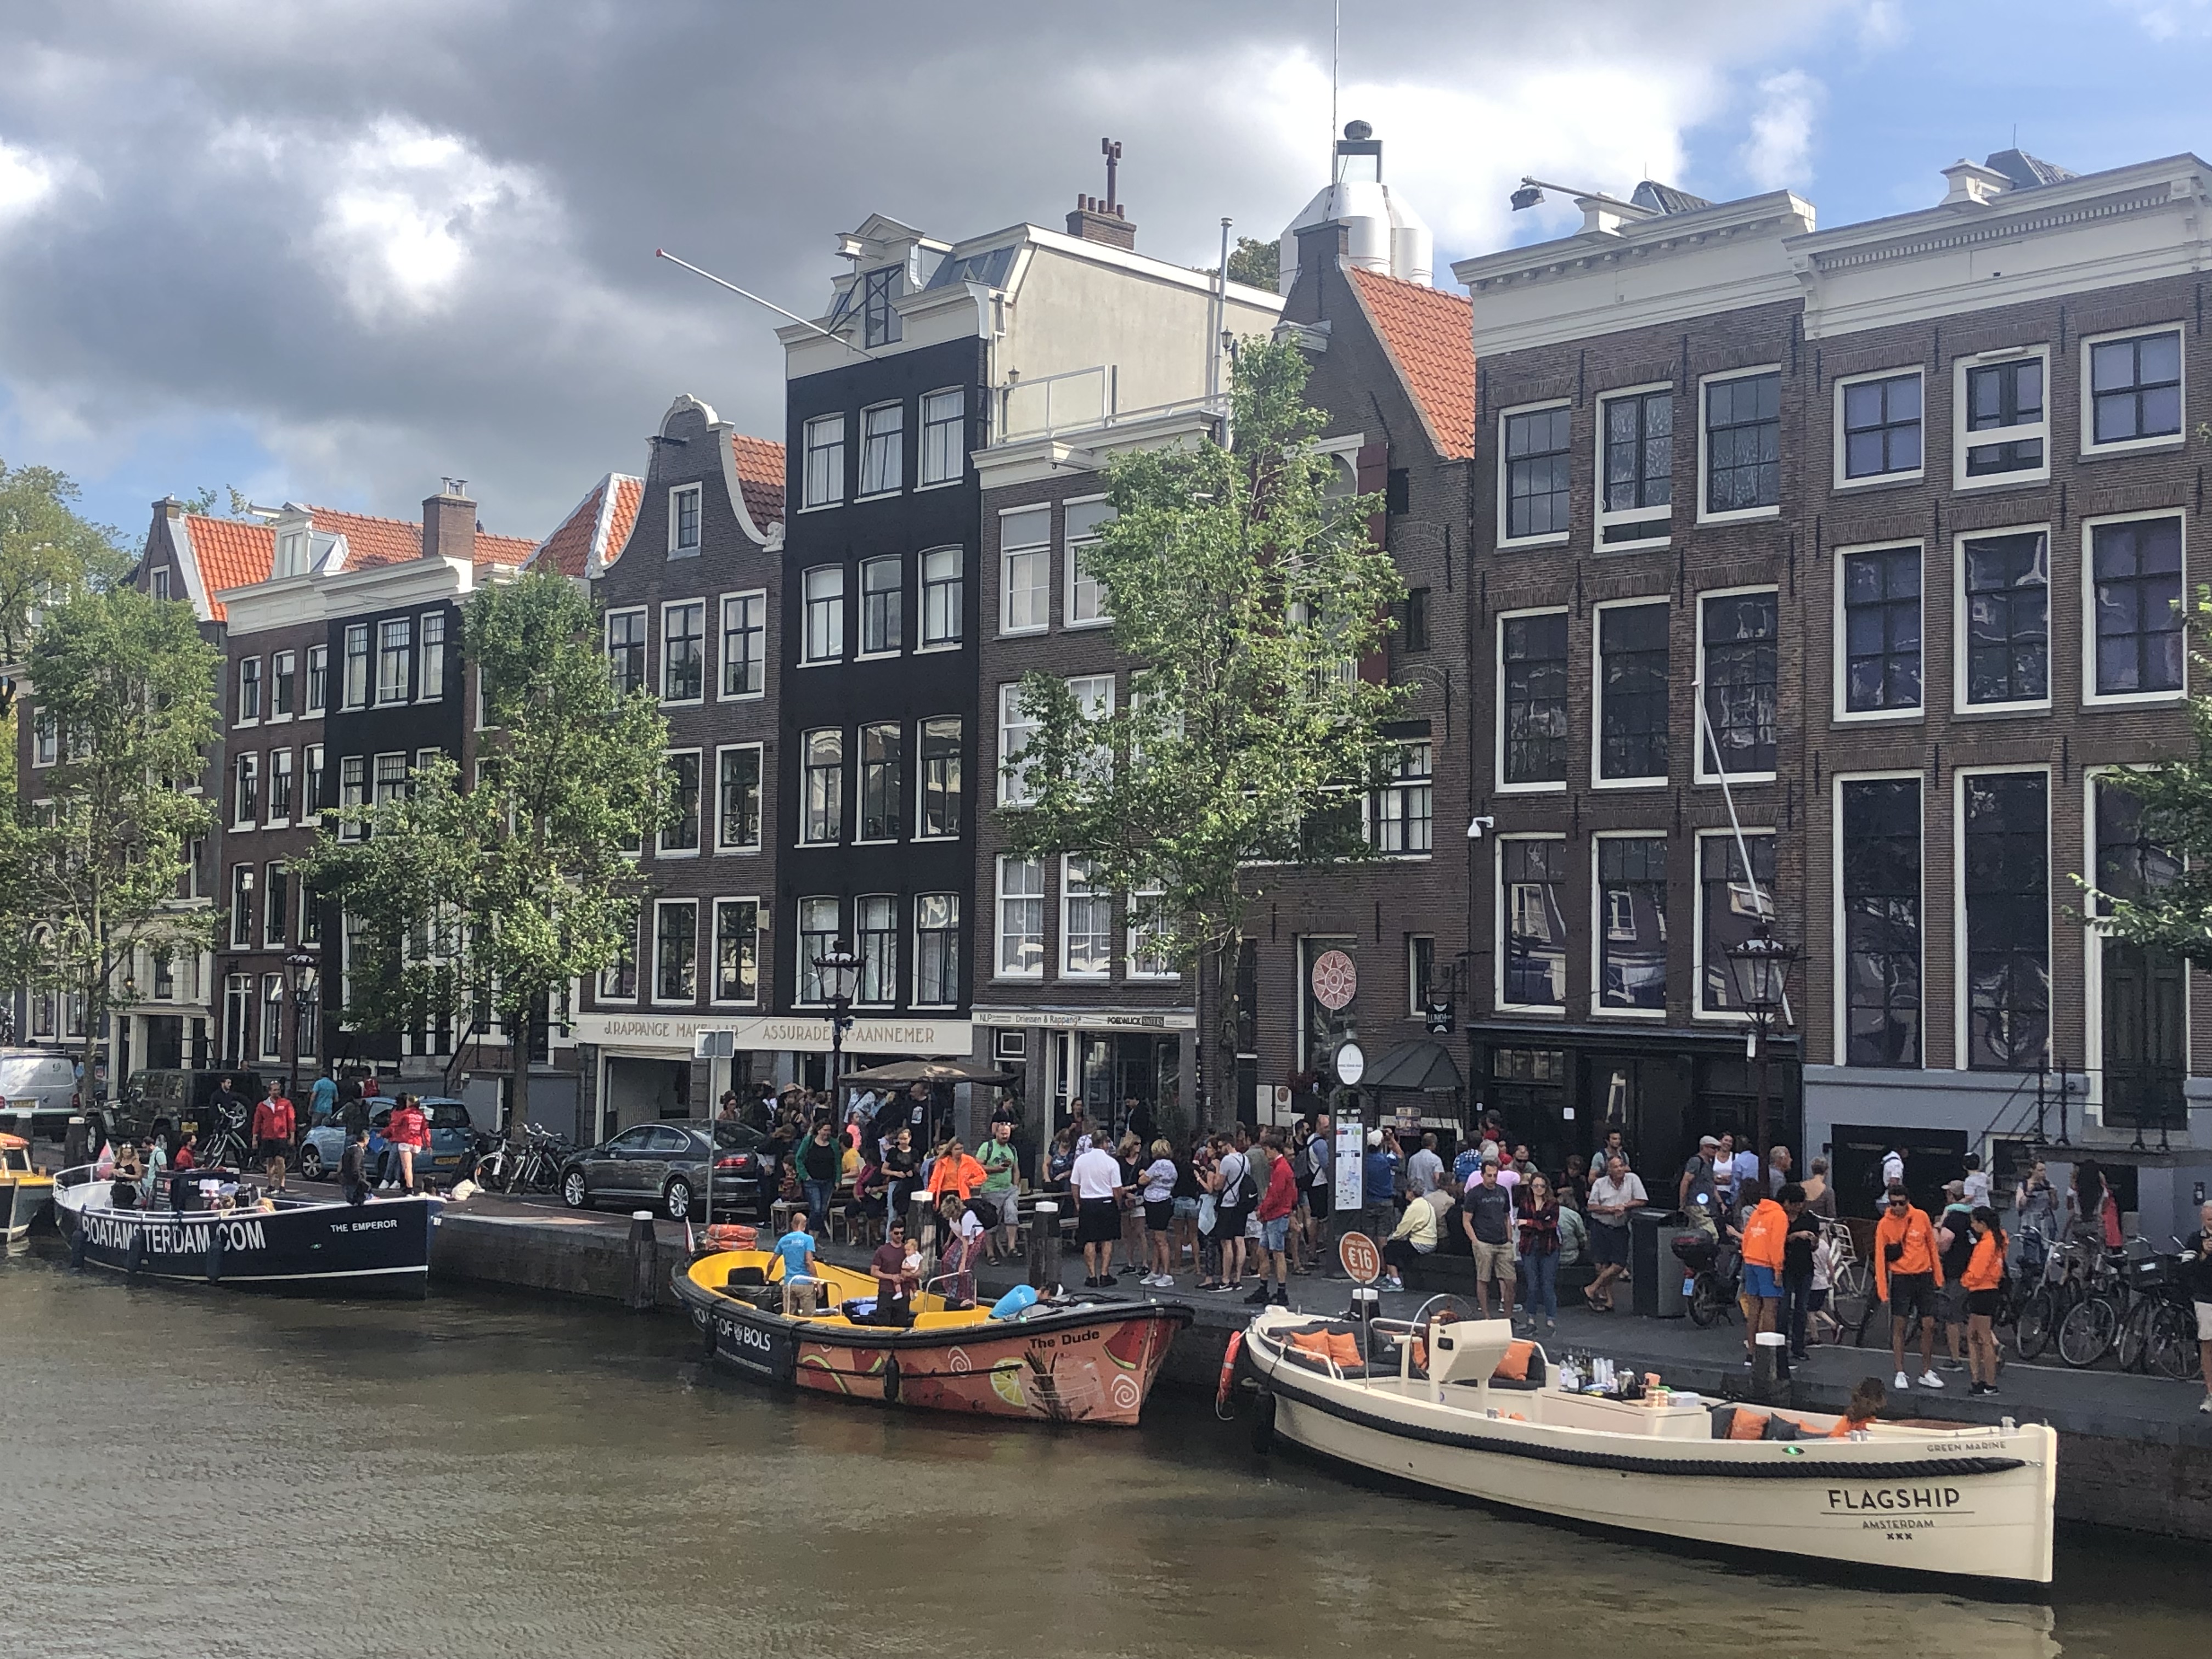 Where is the Anne Frank house / museum located in Amsterdam?